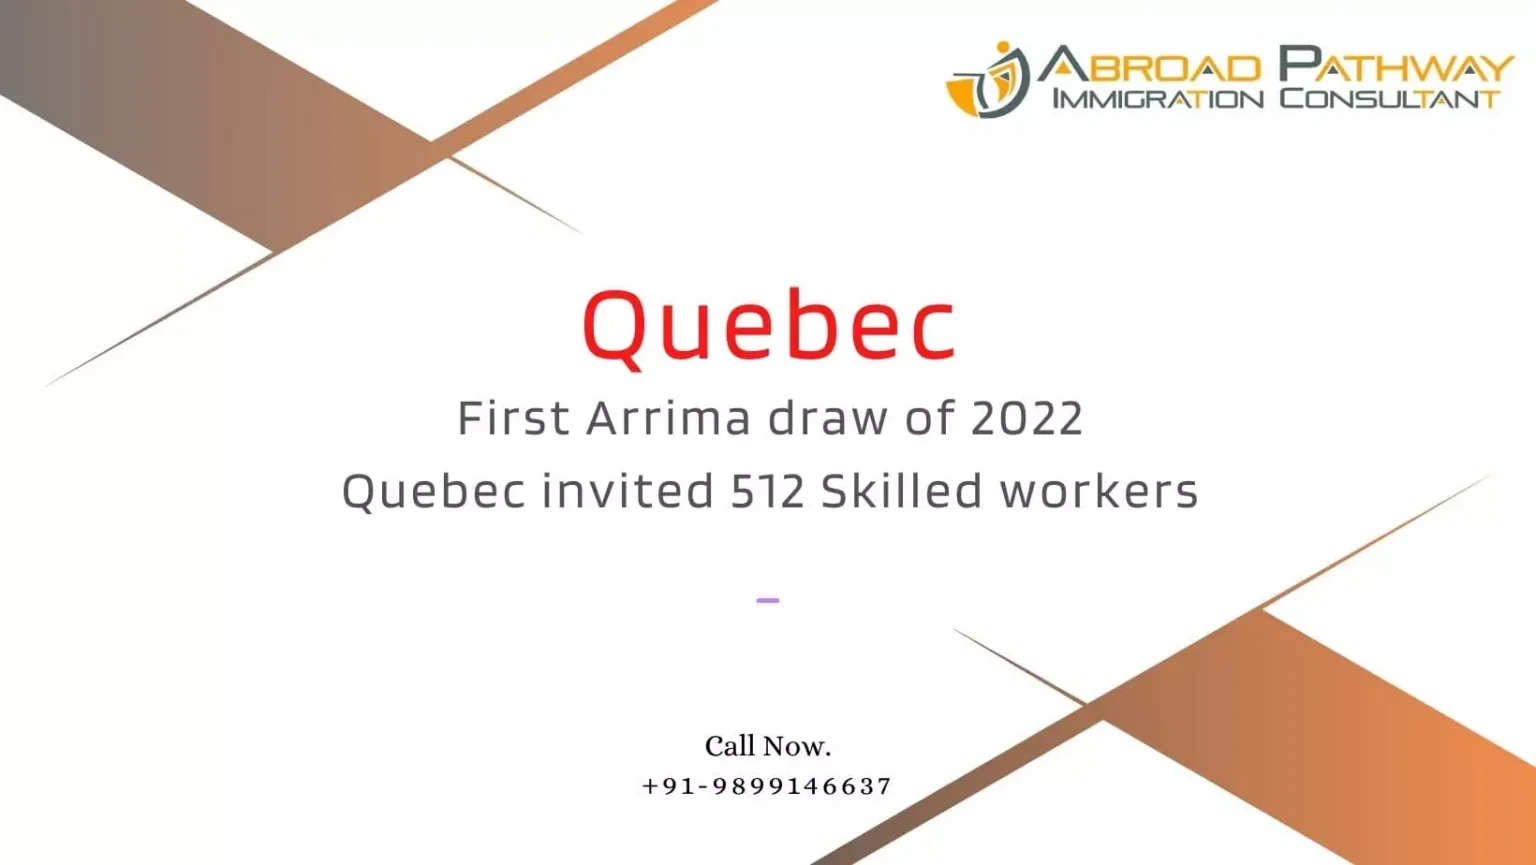 Quebec invitations 512 in first Arrima draw of 2022